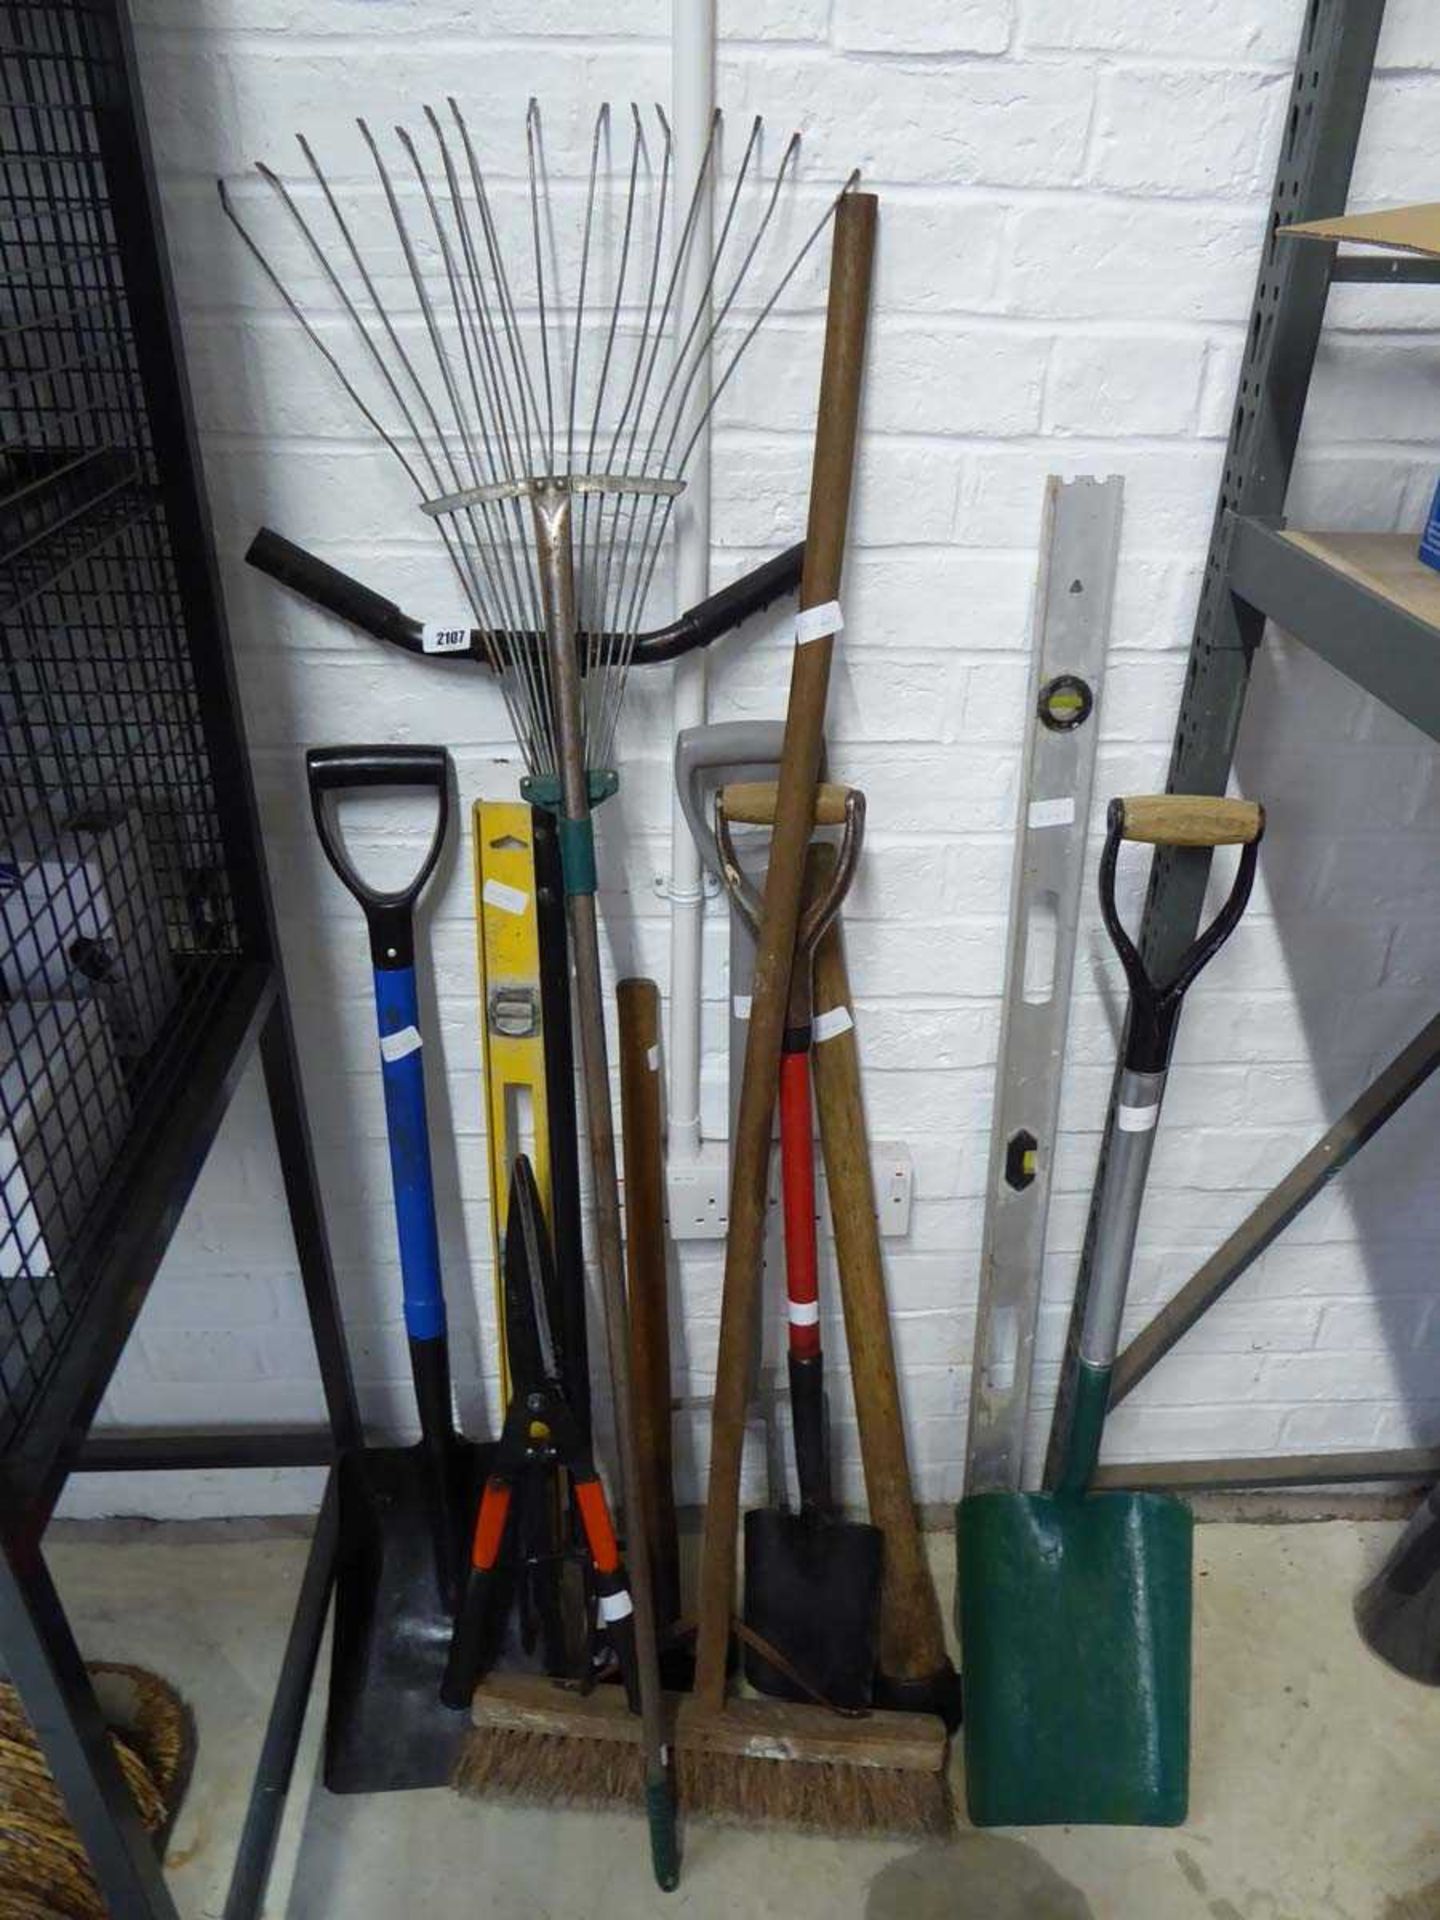 Quantity of outdoor garden hand tools to include shovels, brushes, rakes etc.